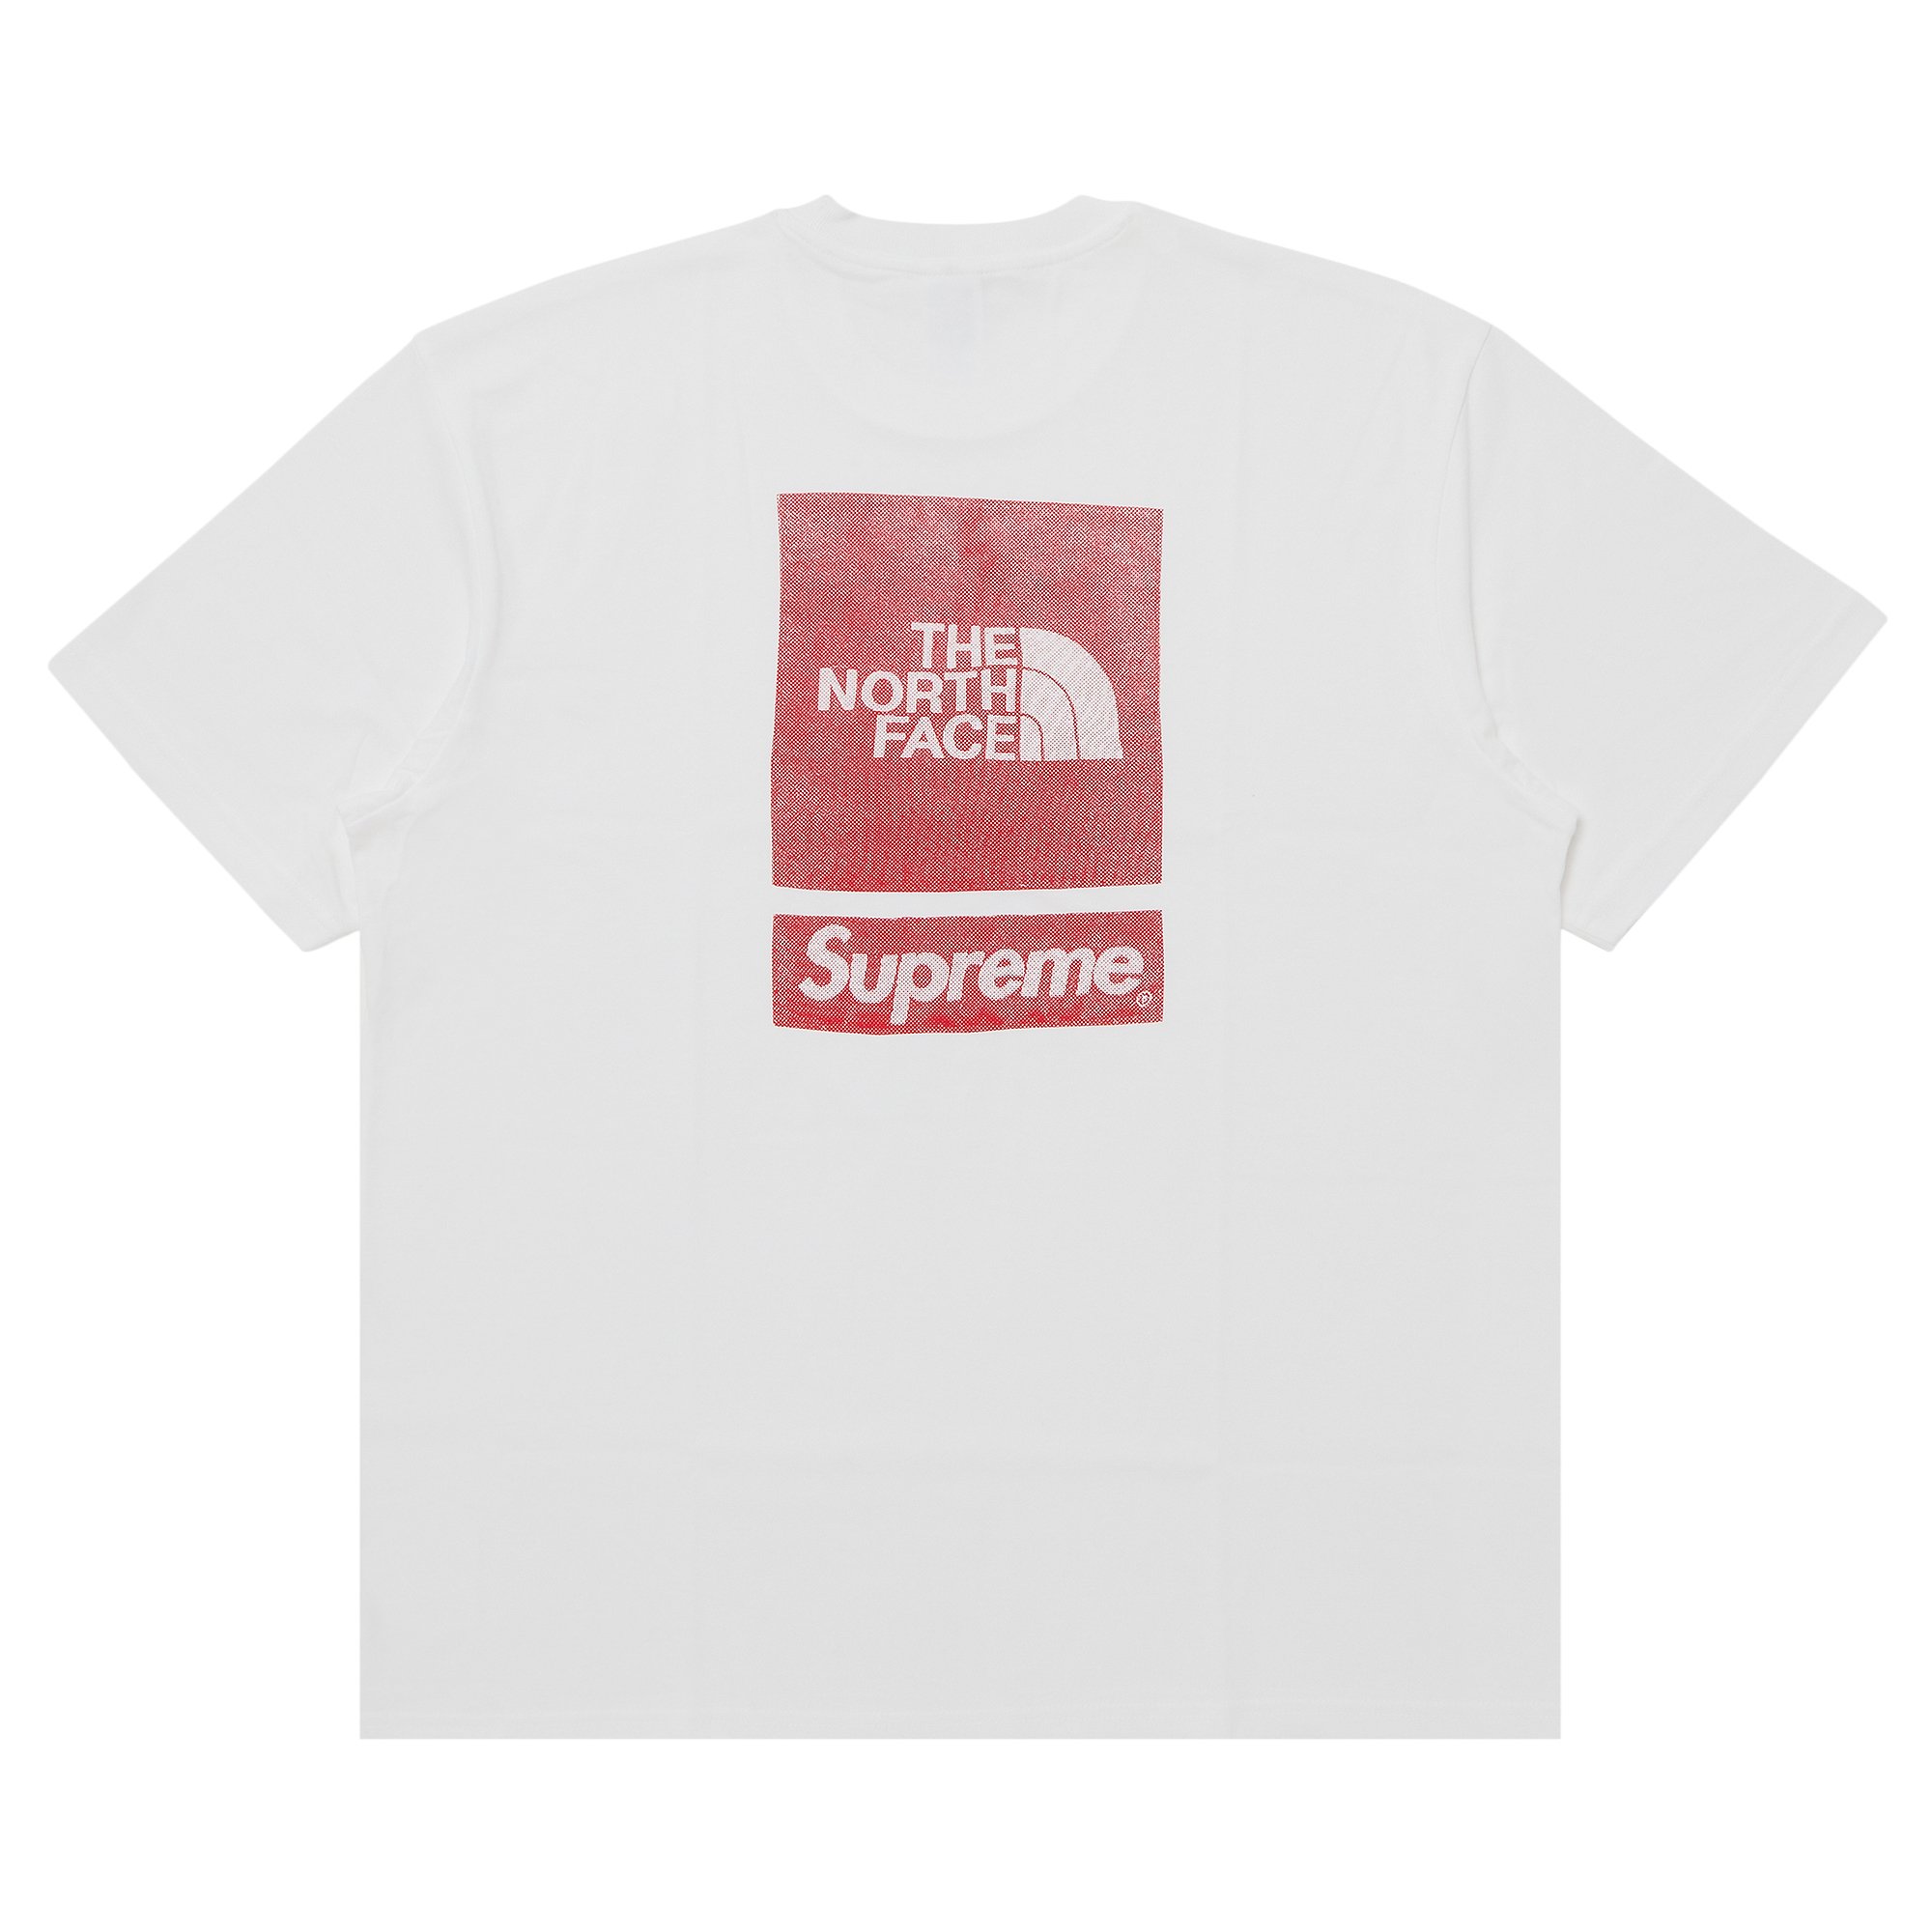 Supreme x The North Face Short-Sleeve Top 'White'